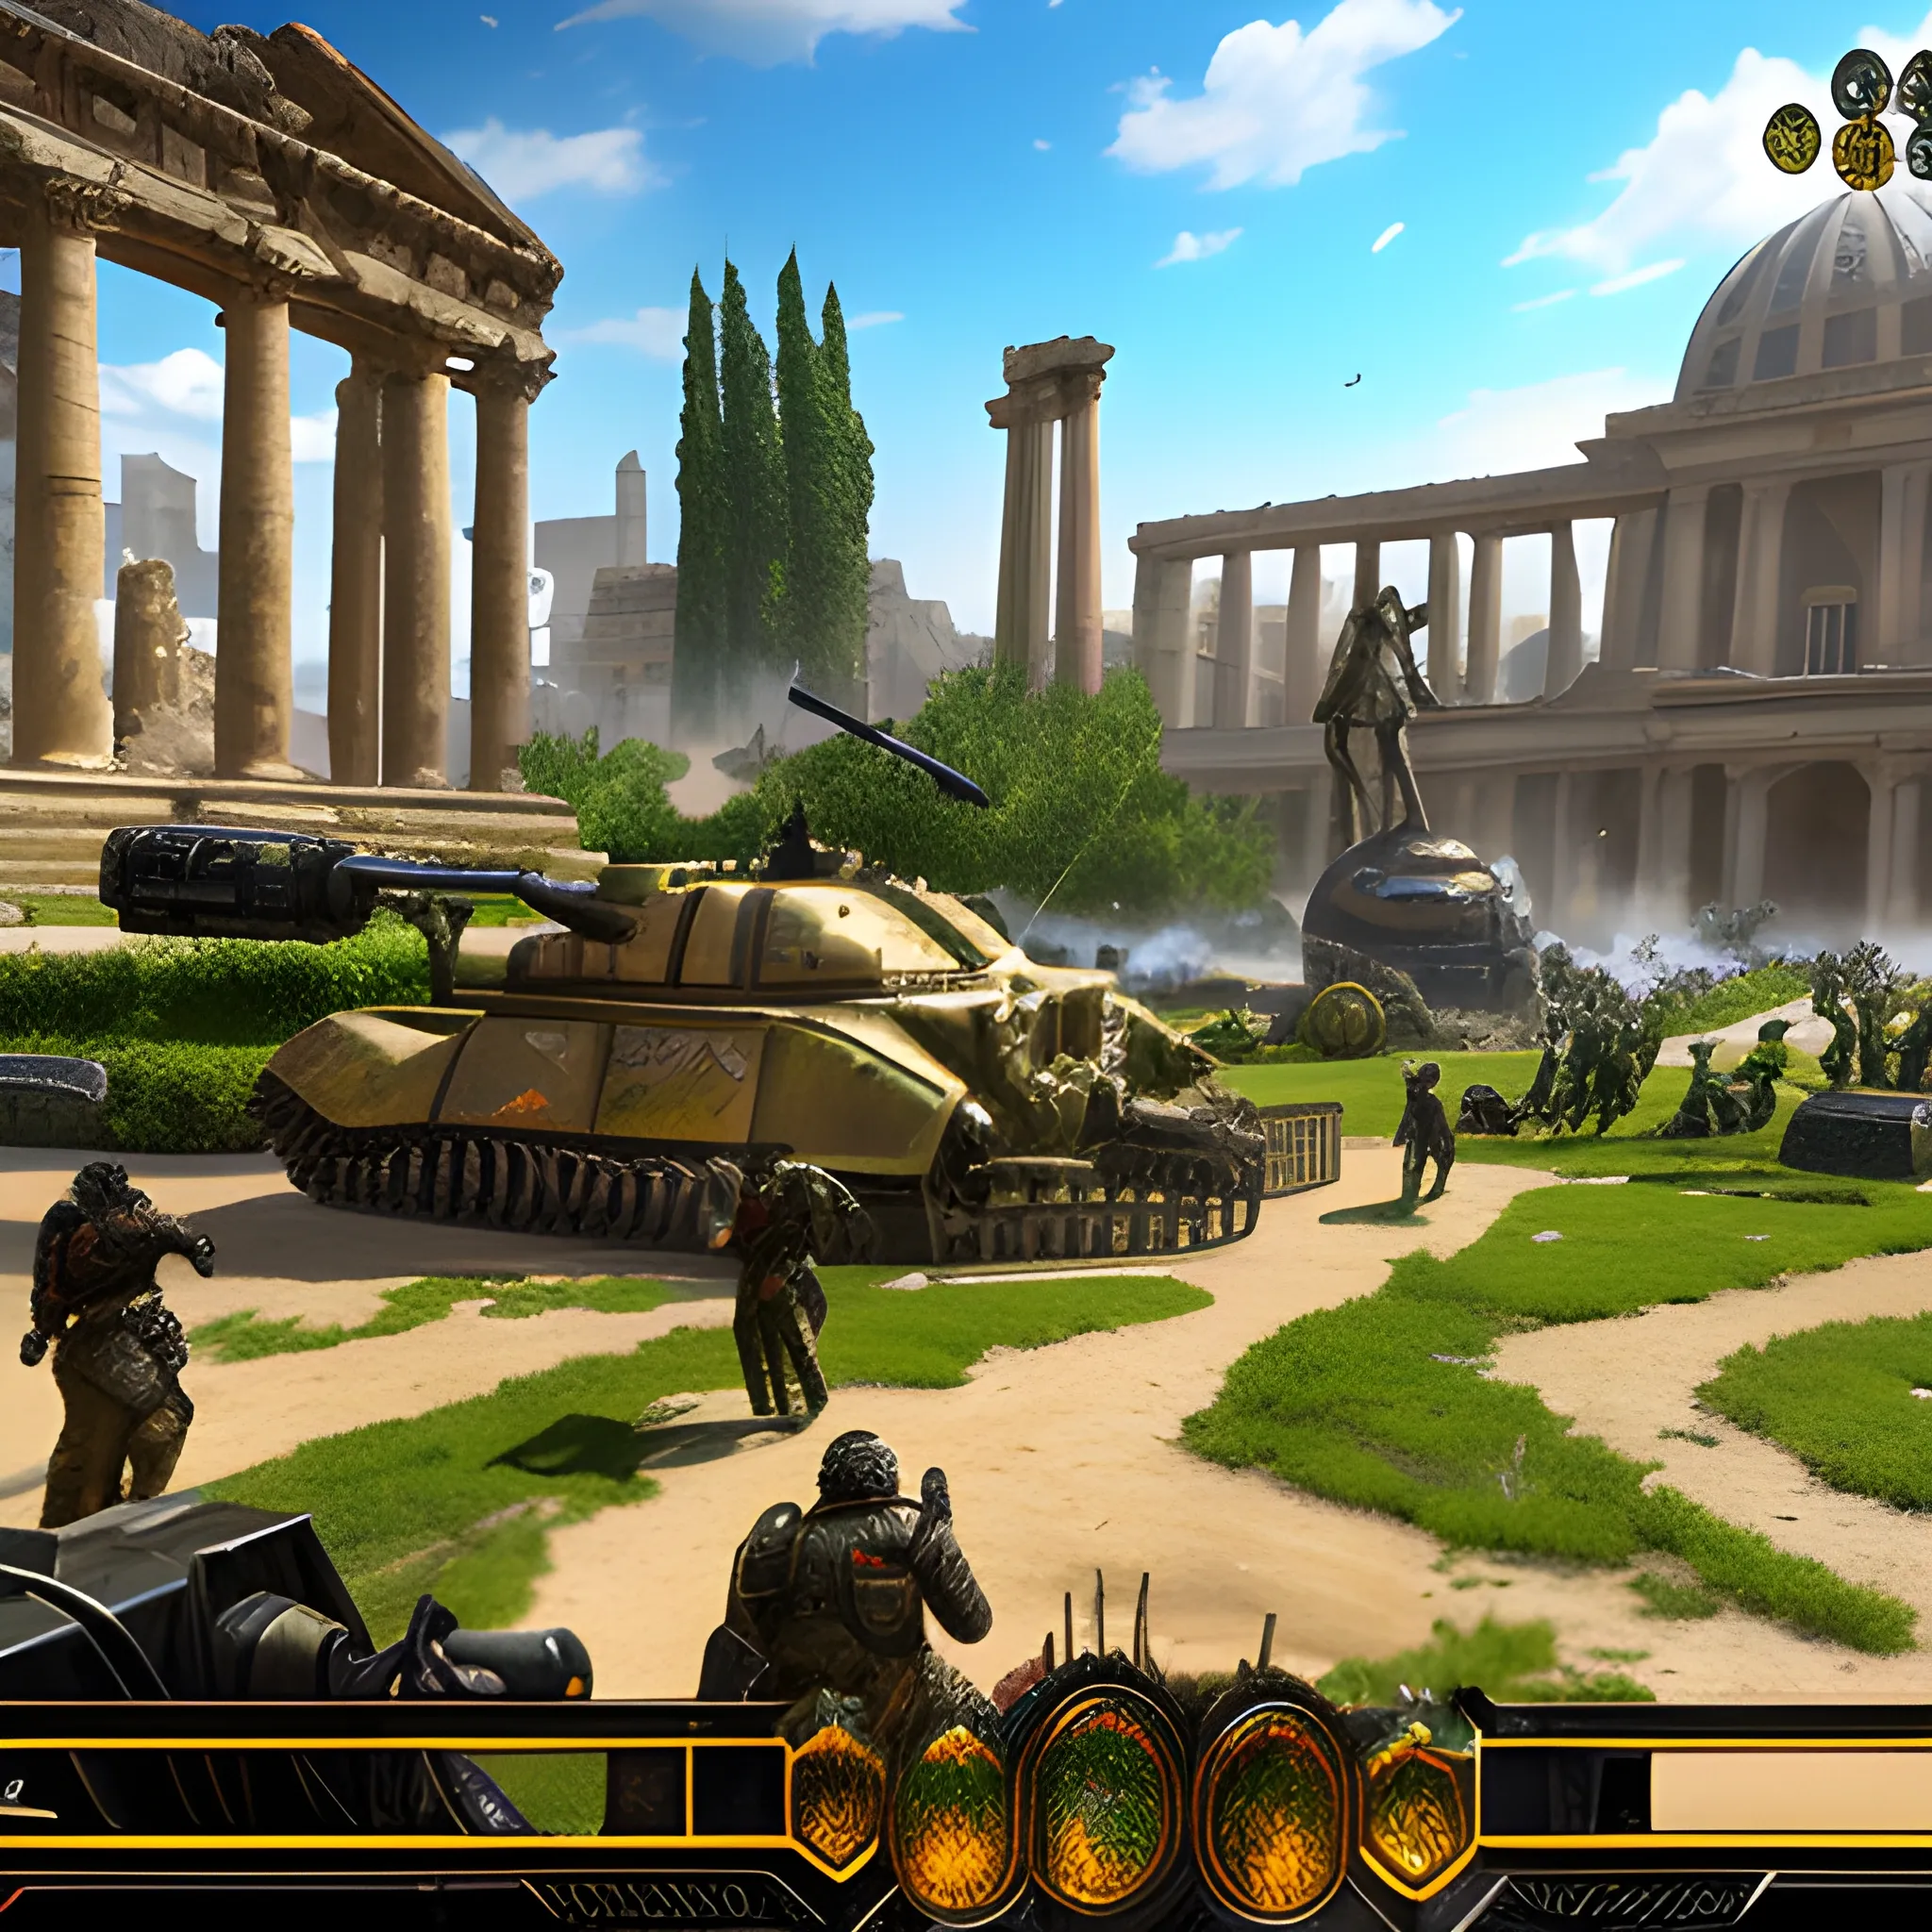 videogame screenshot with huge spangly sparkly triple-barrelled assault rifle with gunsight in foreground, with young mothers pushing baby buggies, in a municipal gardens, in the ancient world, very detailed